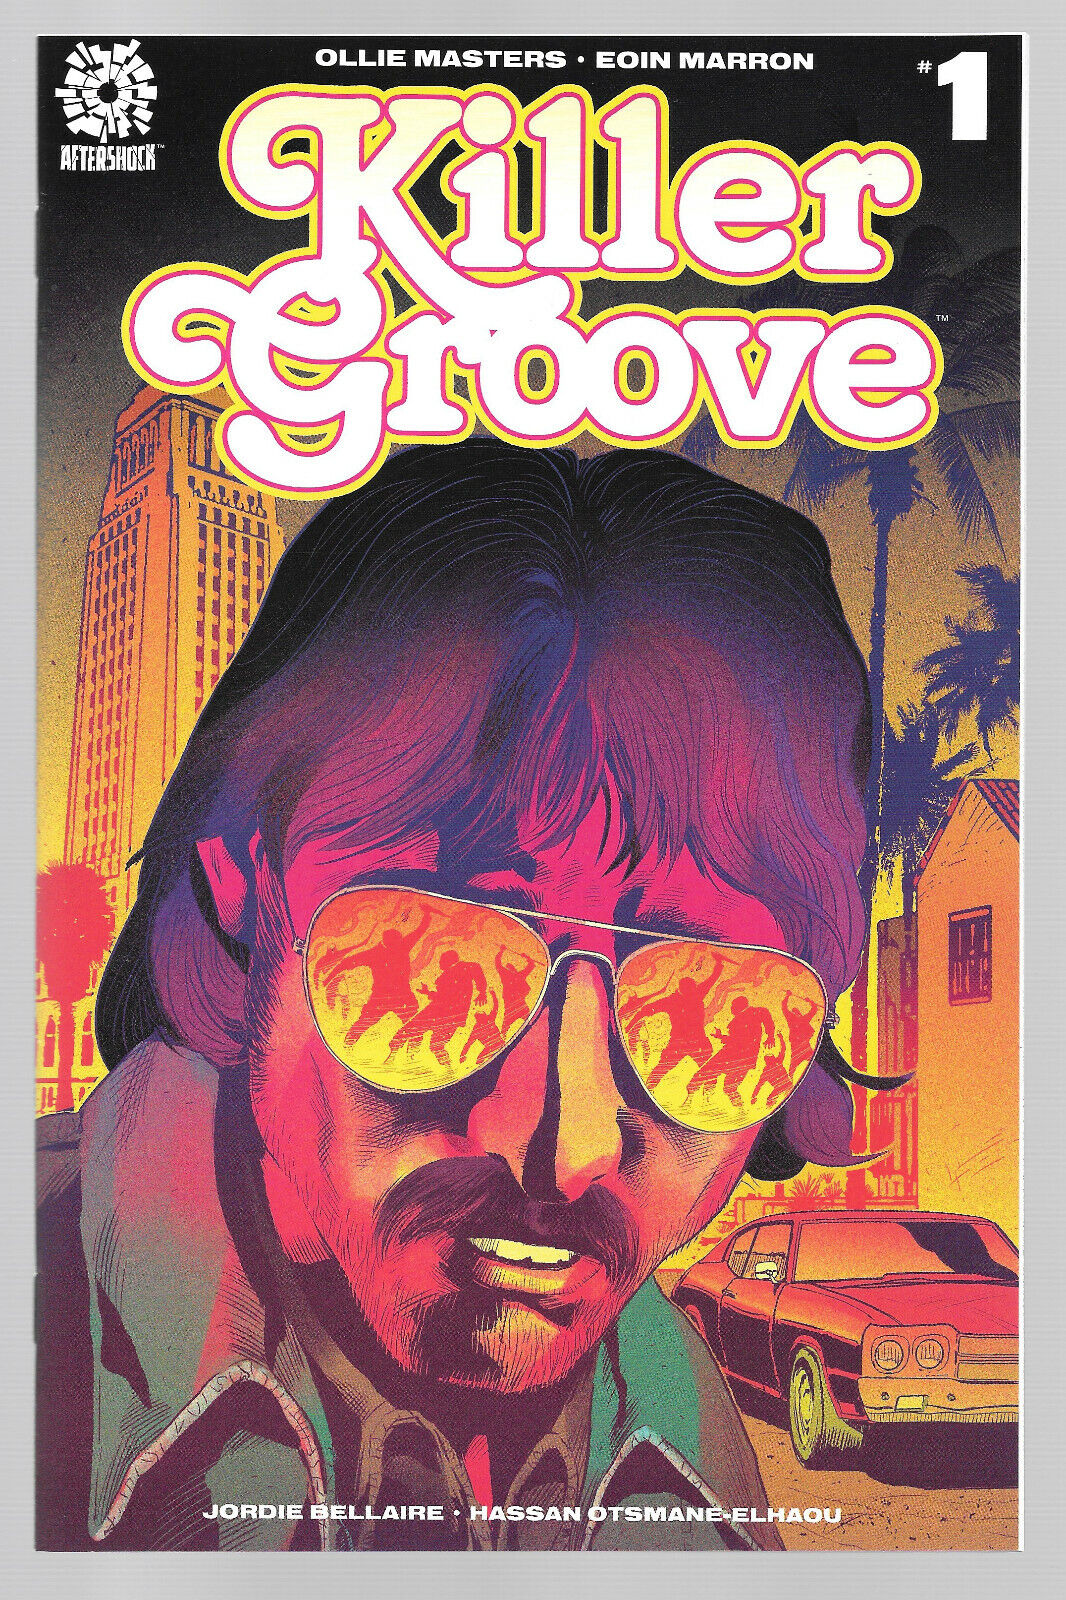 Killer Groove #1 Aftershock Comics Cliff Richards 1:10 Retail Variant Cover 